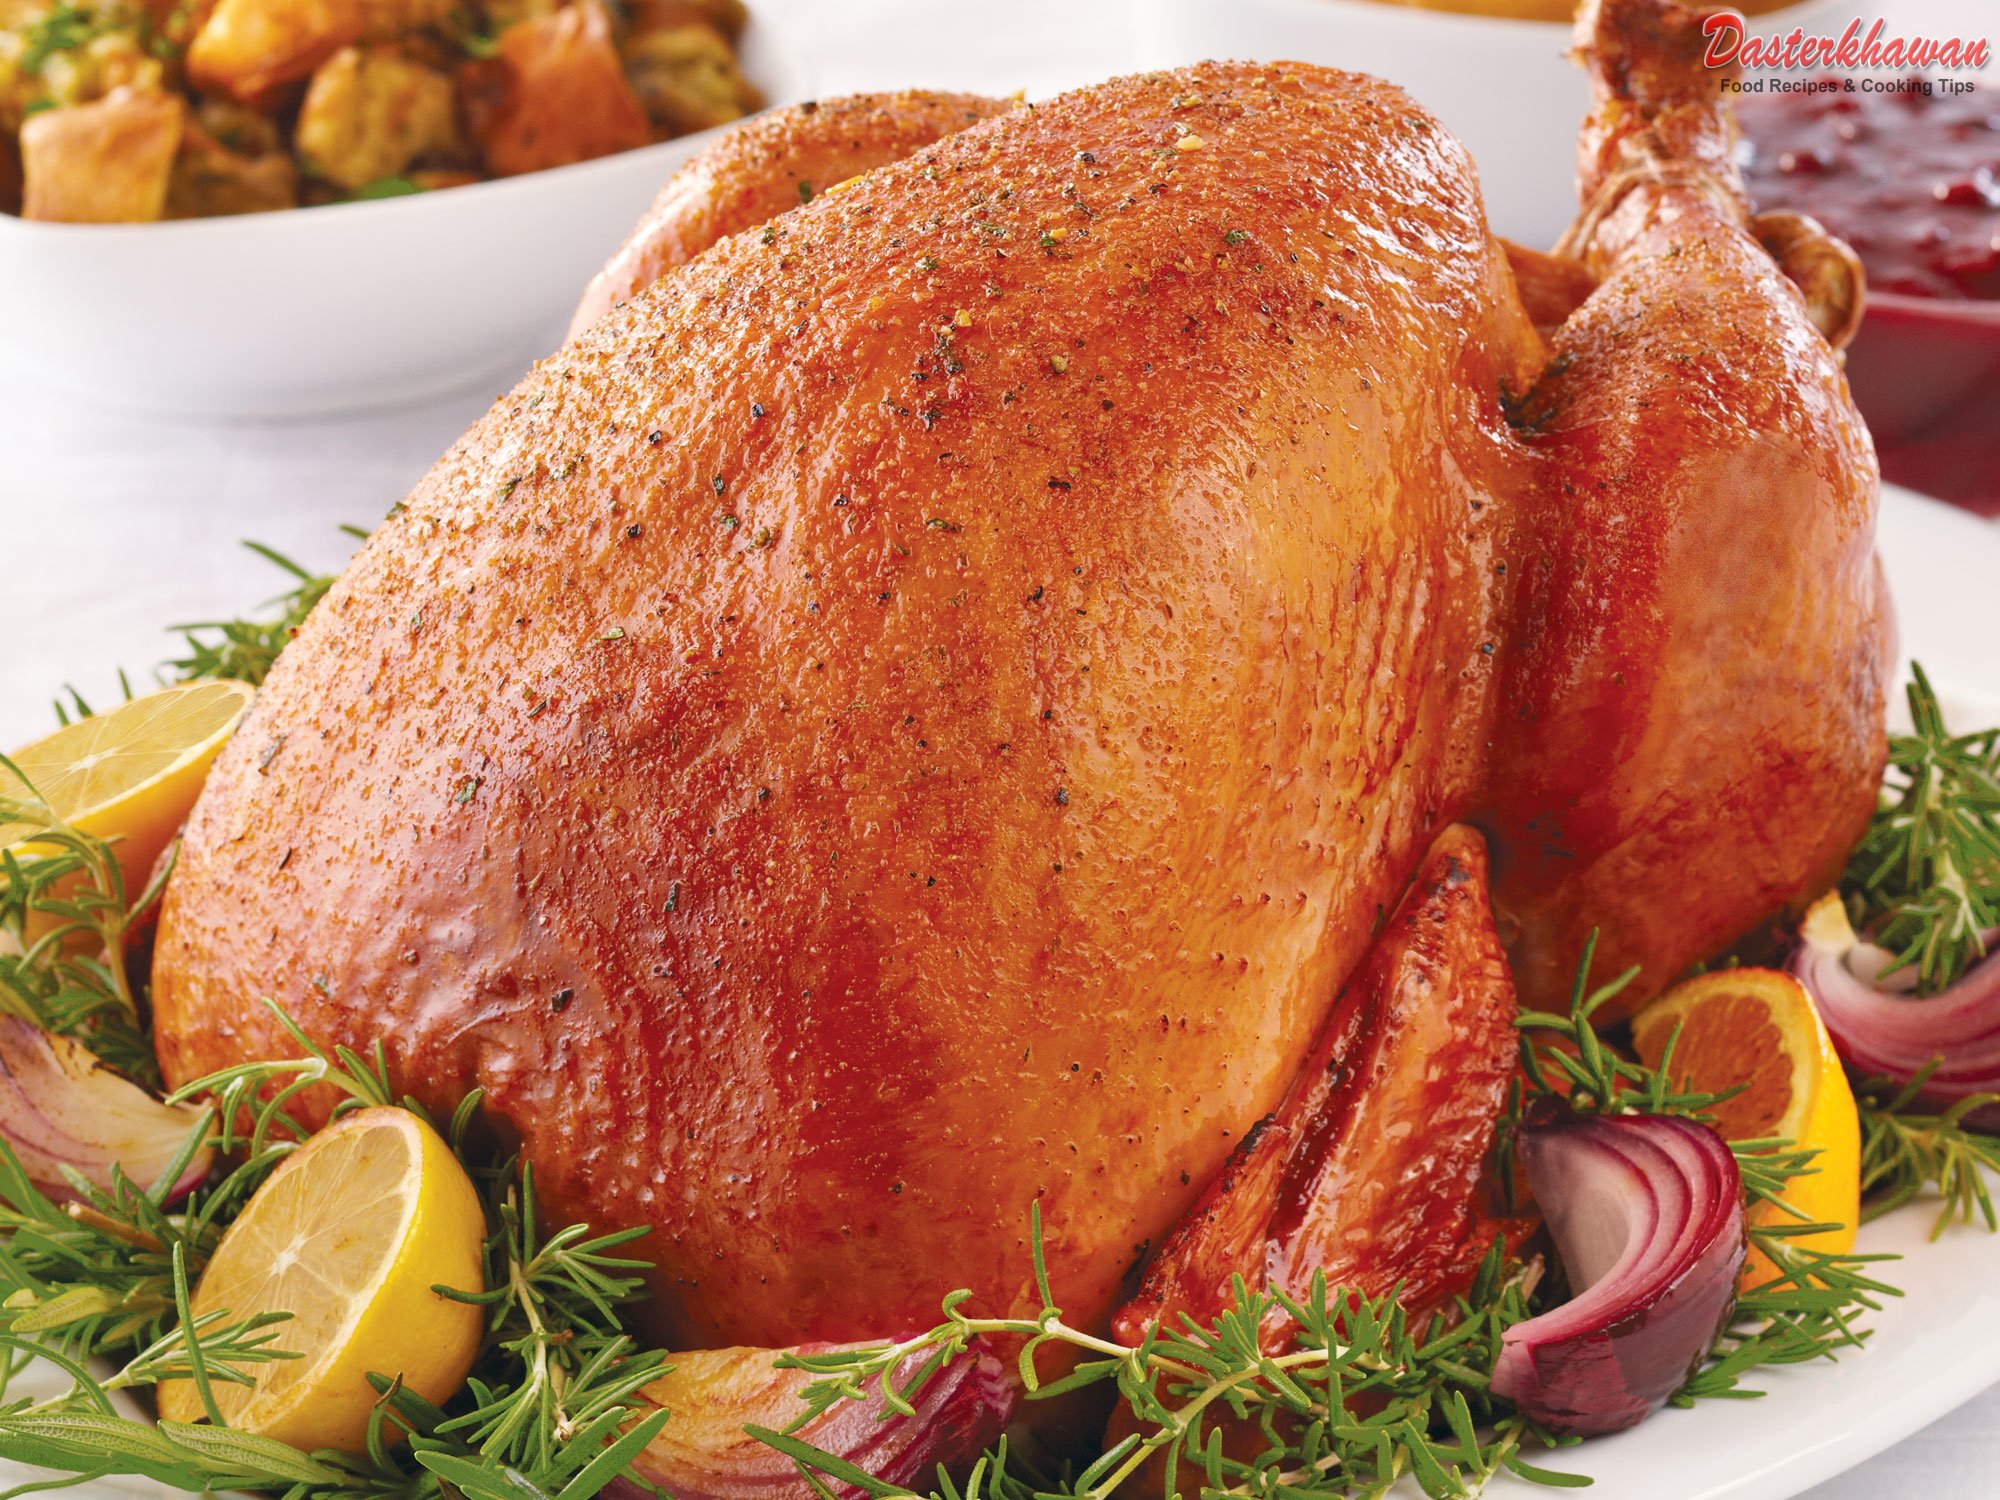 How To Prepare A Turkey For Thanksgiving - Photos Cantik